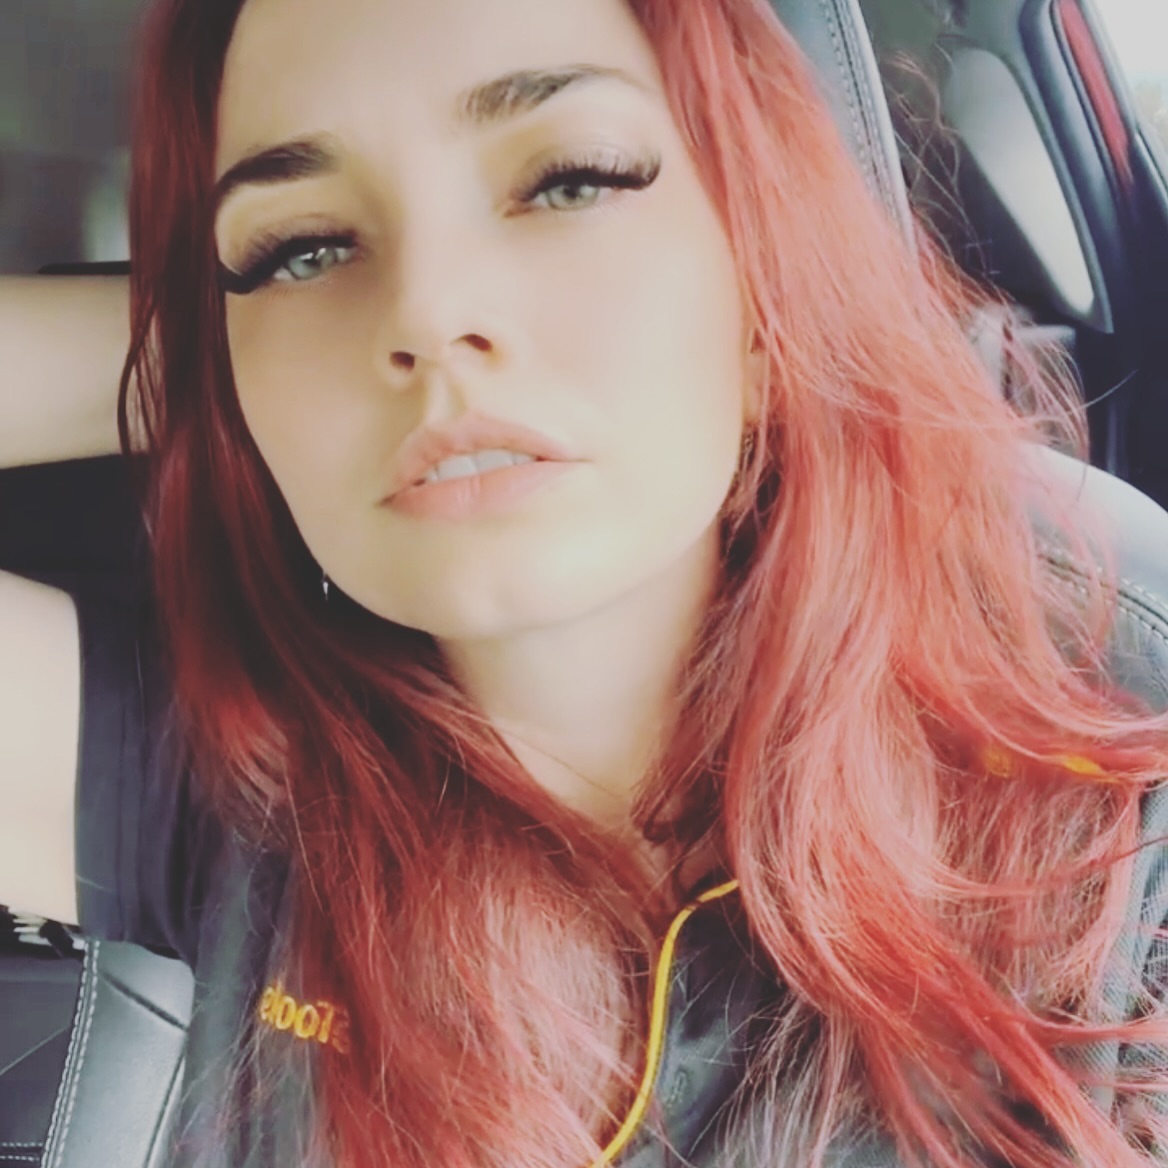 Come for a spin? 😏

𝓜𝓲𝓵𝓴𝔂 𝓑𝓾𝓷𝓷𝓲

#onlyfriends #sub #goddess #linkinbio #redhair #redhead  #aussie #aussiegirls #gonewild #customs #showingface #fetish #fetishmodel #photo #picoftheday #greeneyes #colouredhair #dirtygirl #fun #letsplay #subsonly #reflection #fulllips #showoff #lashes